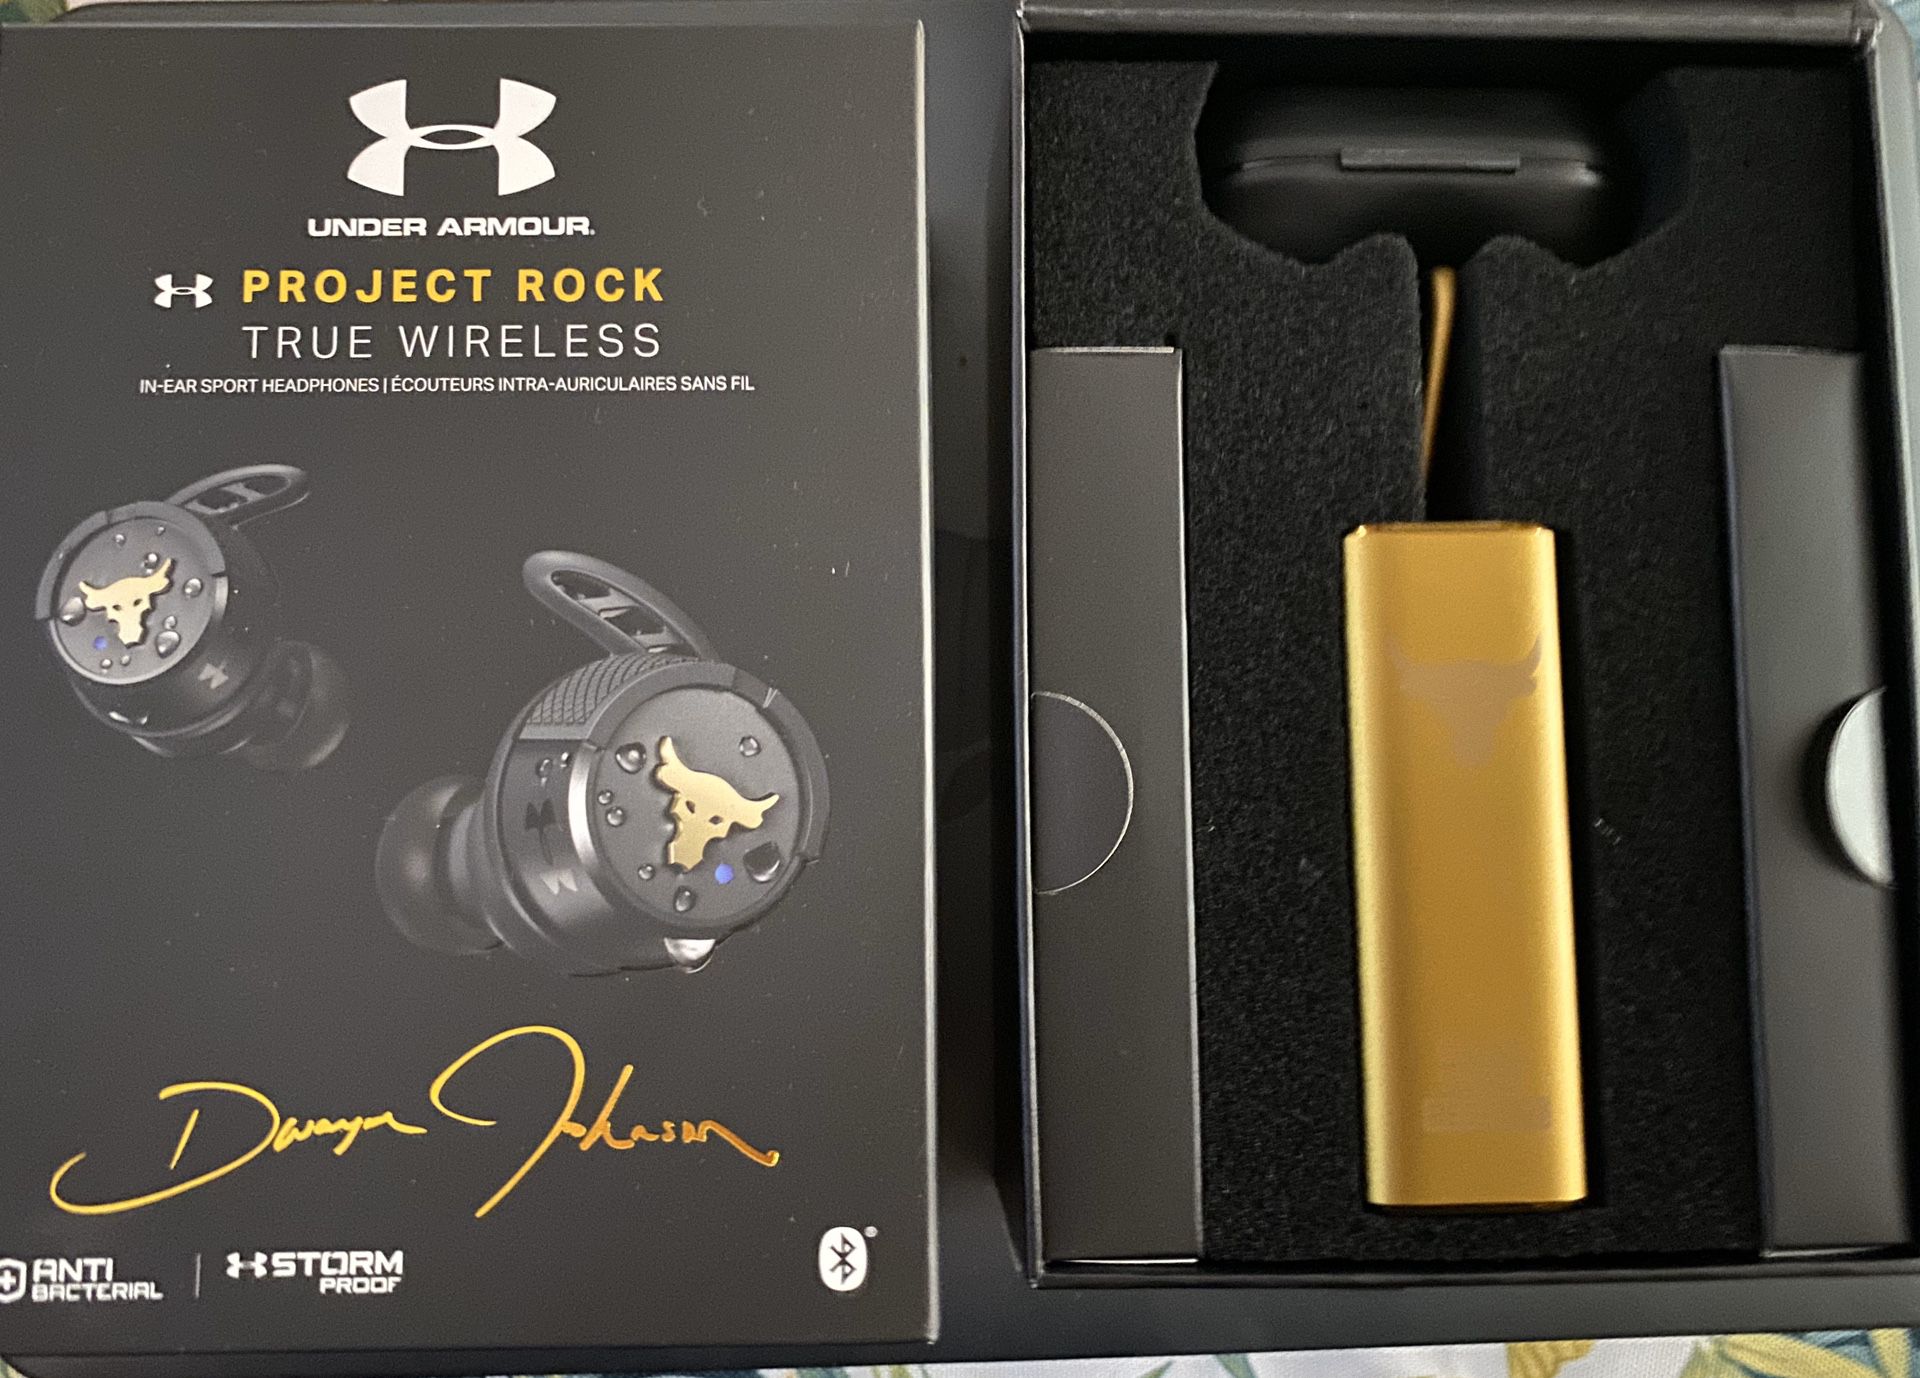 Limited Edition Project Rock sport headphones